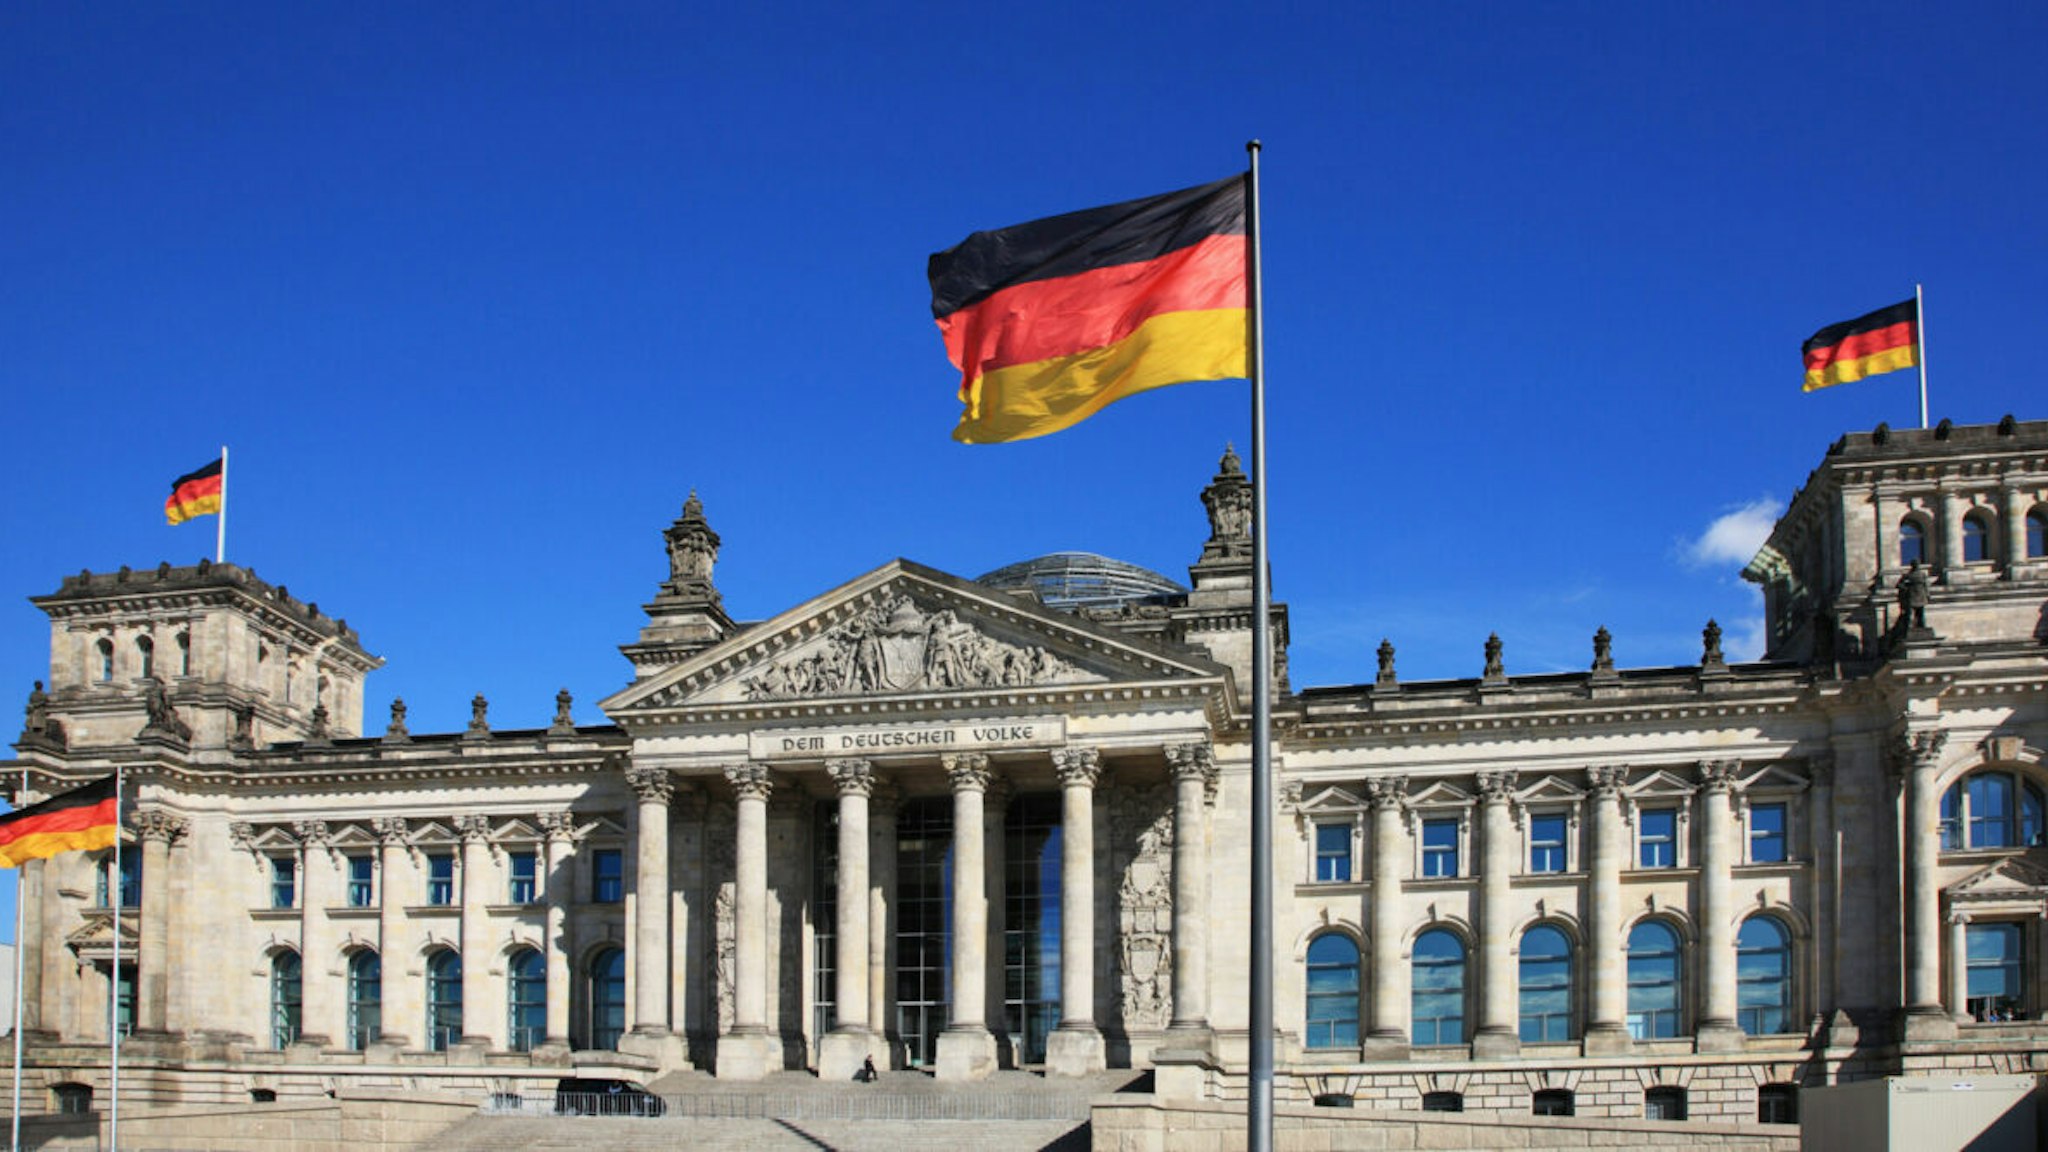 Germany, Berlin, Reichstag, the Parliament Building and national flag via Getty Images